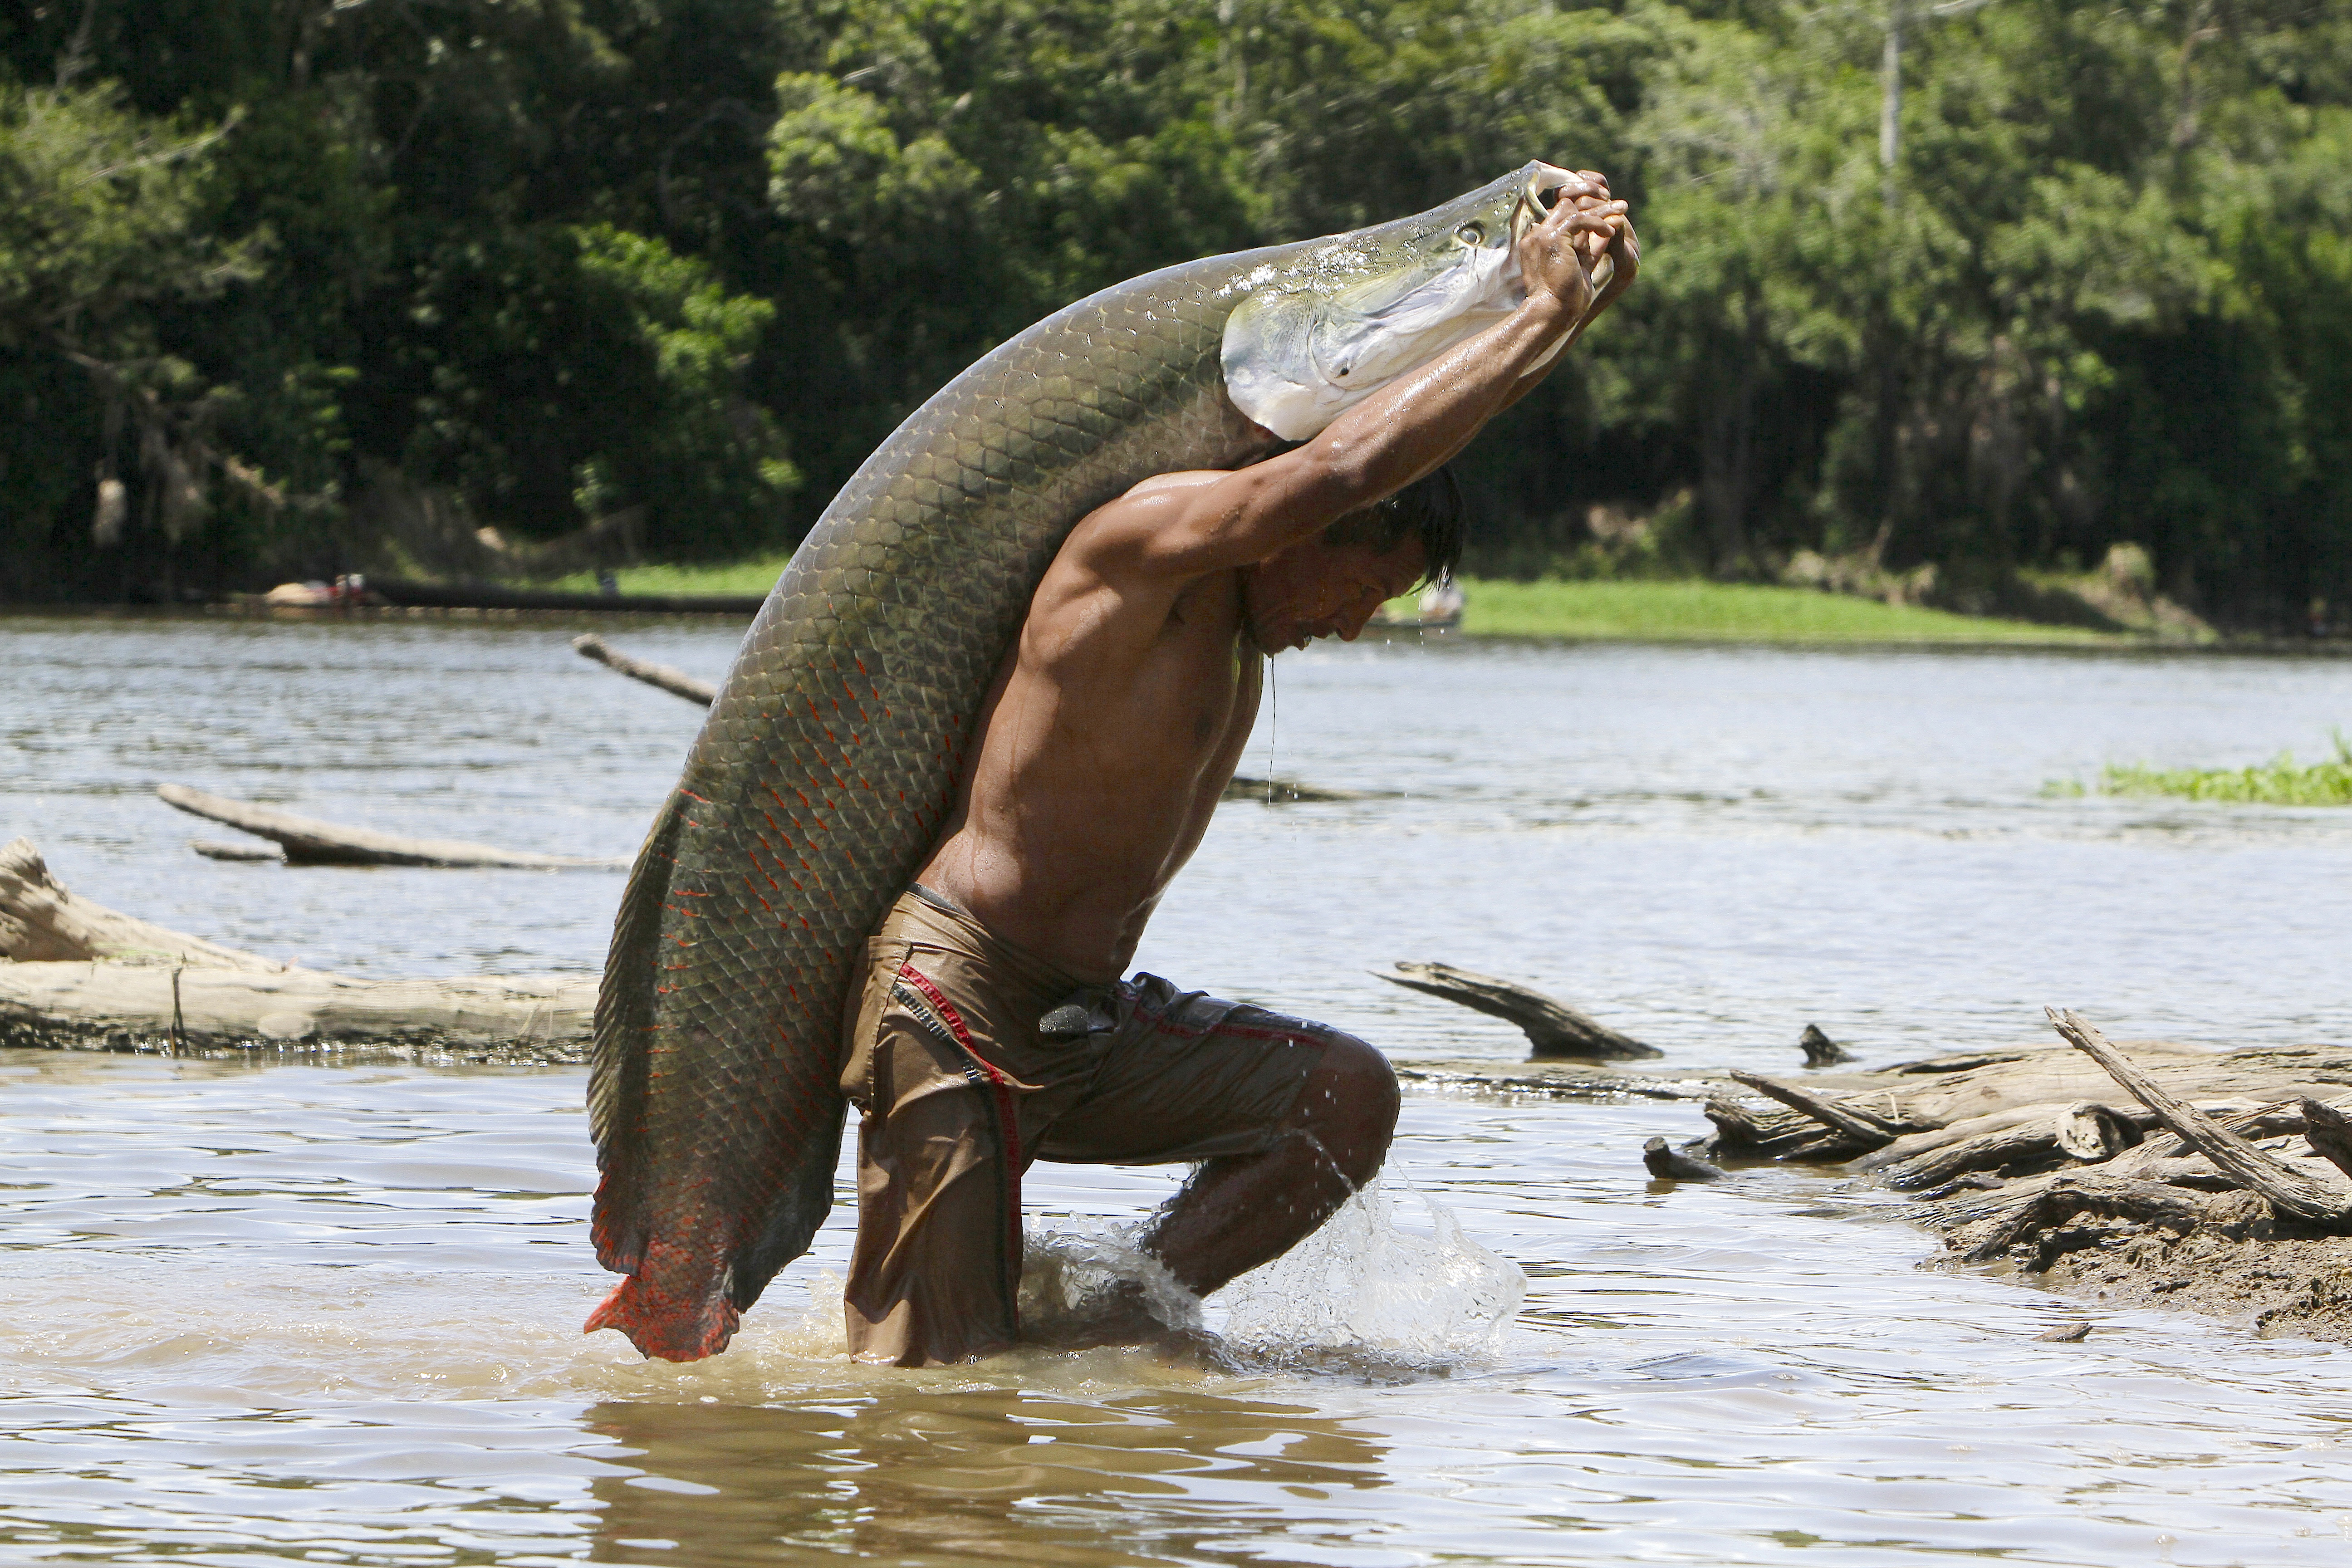 Giant Amazon fish extinct in many fishing communities, saved in ...